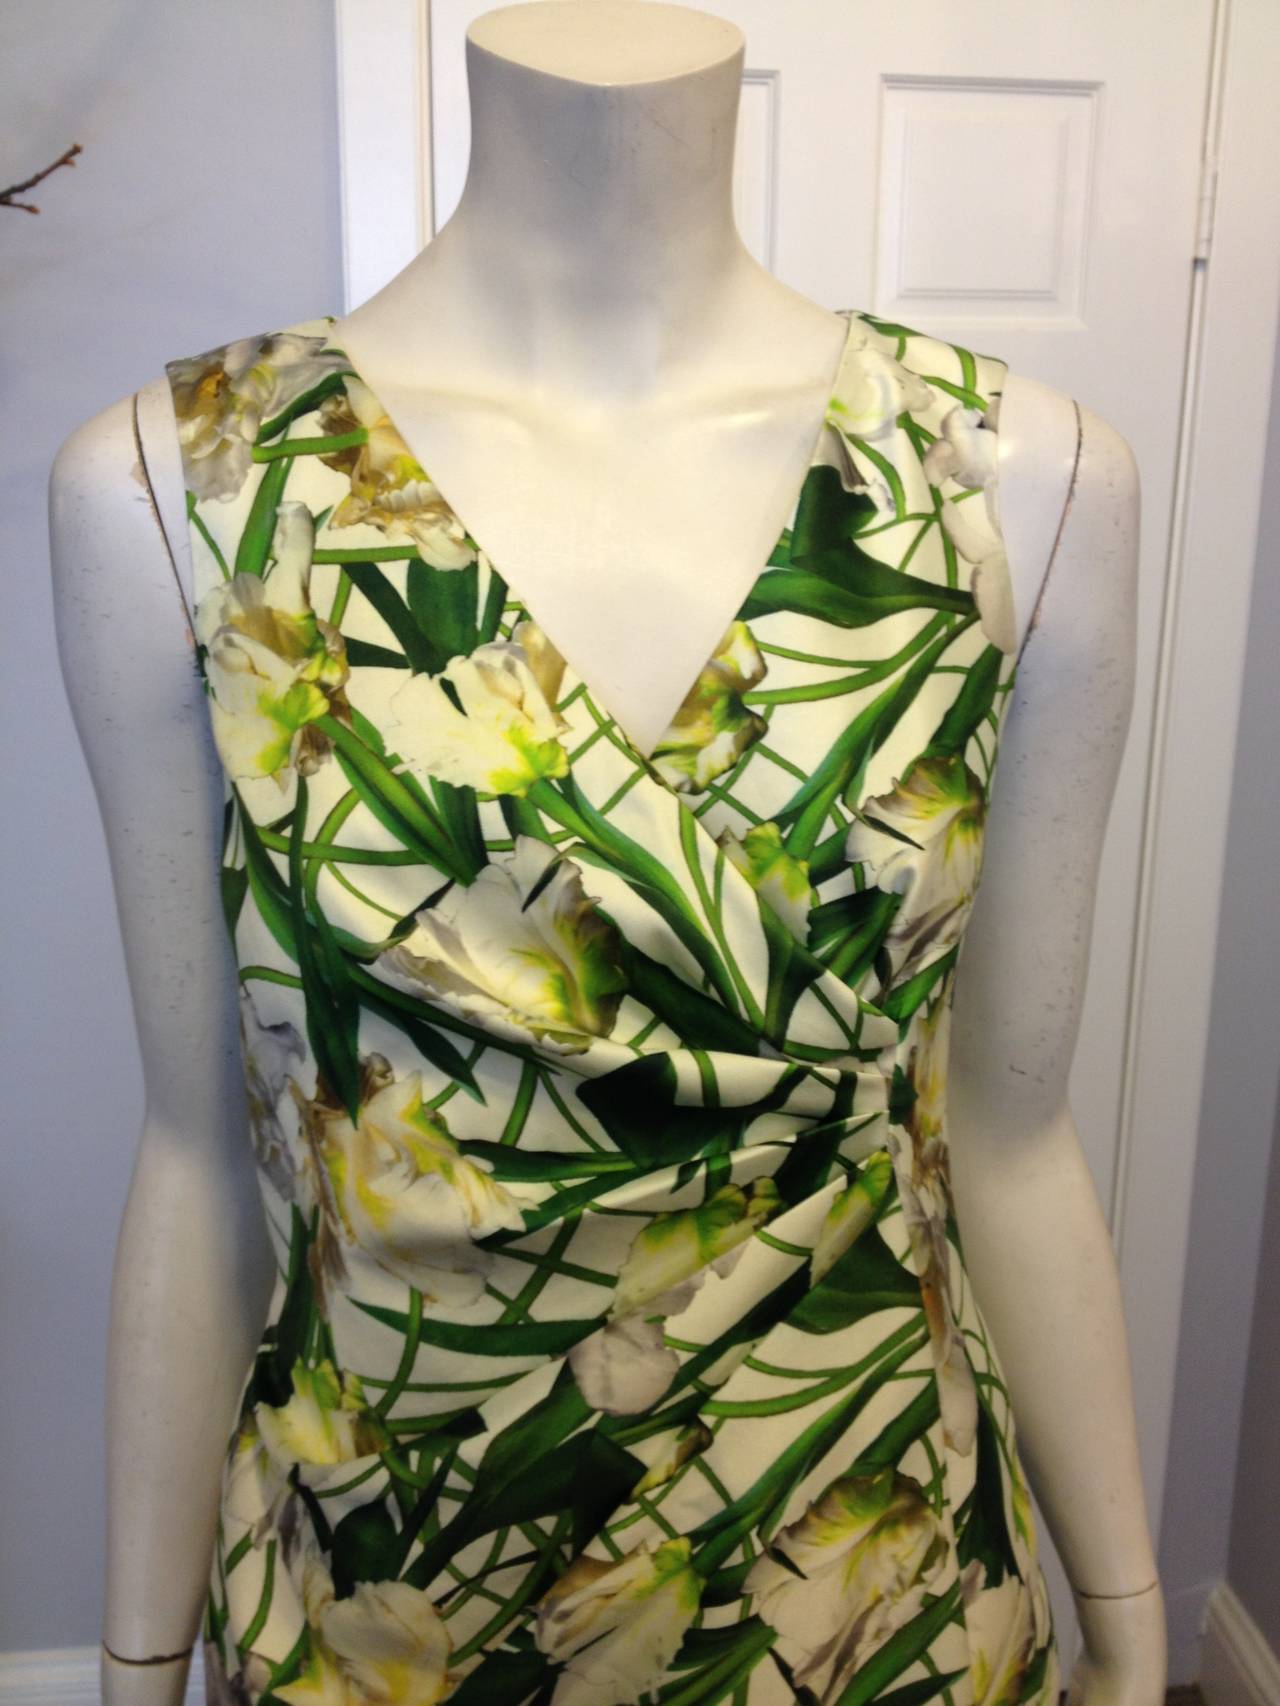 This piece is so elegant and so Oscar de la Renta. Taking inspiration from spring flora, this dress features an extremely vibrant hyperrealistic print of cream and green flowers on a white background, each bloom nestled in a web of bright green